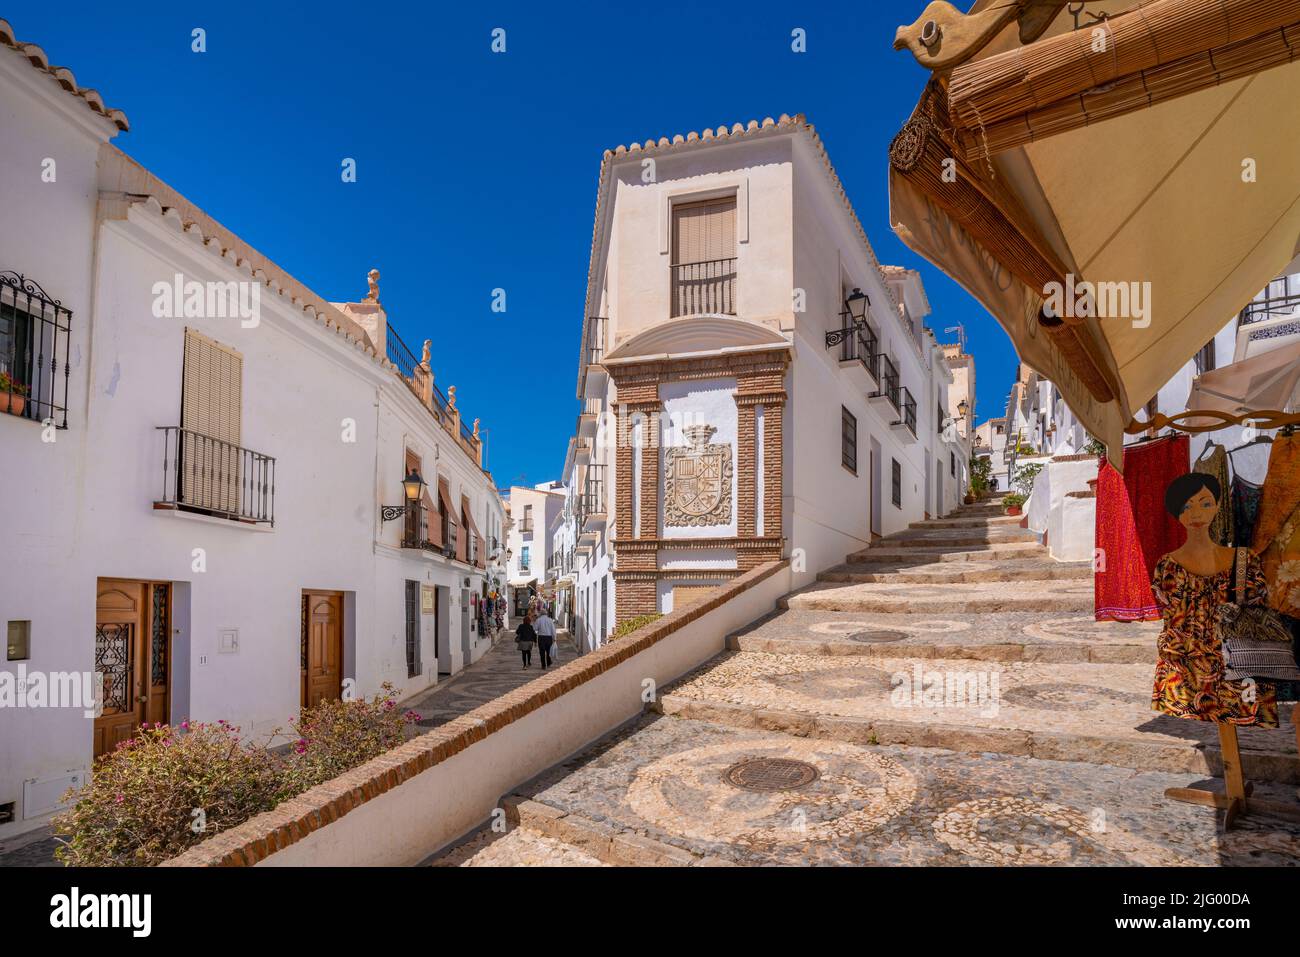 View of whitewashed houses and clothes shop on narrow street, Frigiliana, Malaga Province, Andalucia, Spain, Mediterranean, Europe Stock Photo